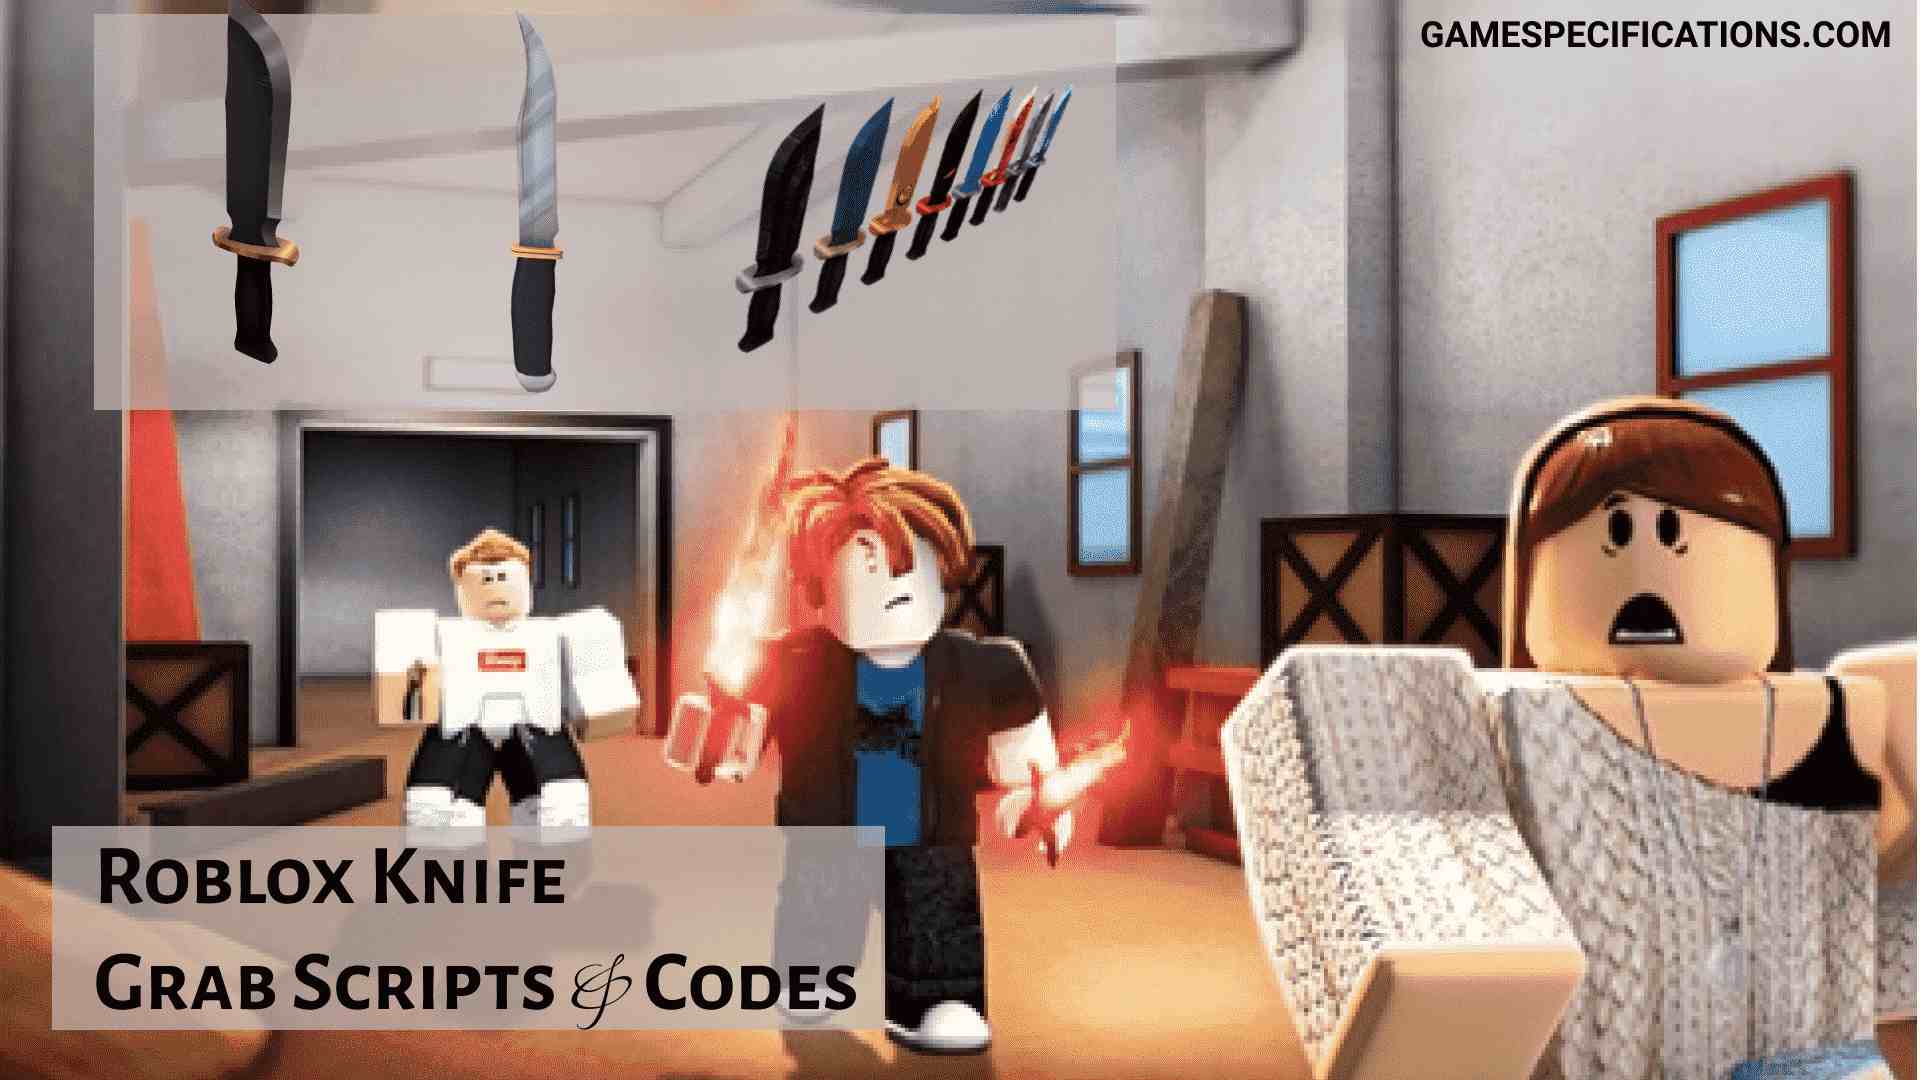 Roblox Knife Grab Script Codes 2021 Game Specifications - corl roblox music video